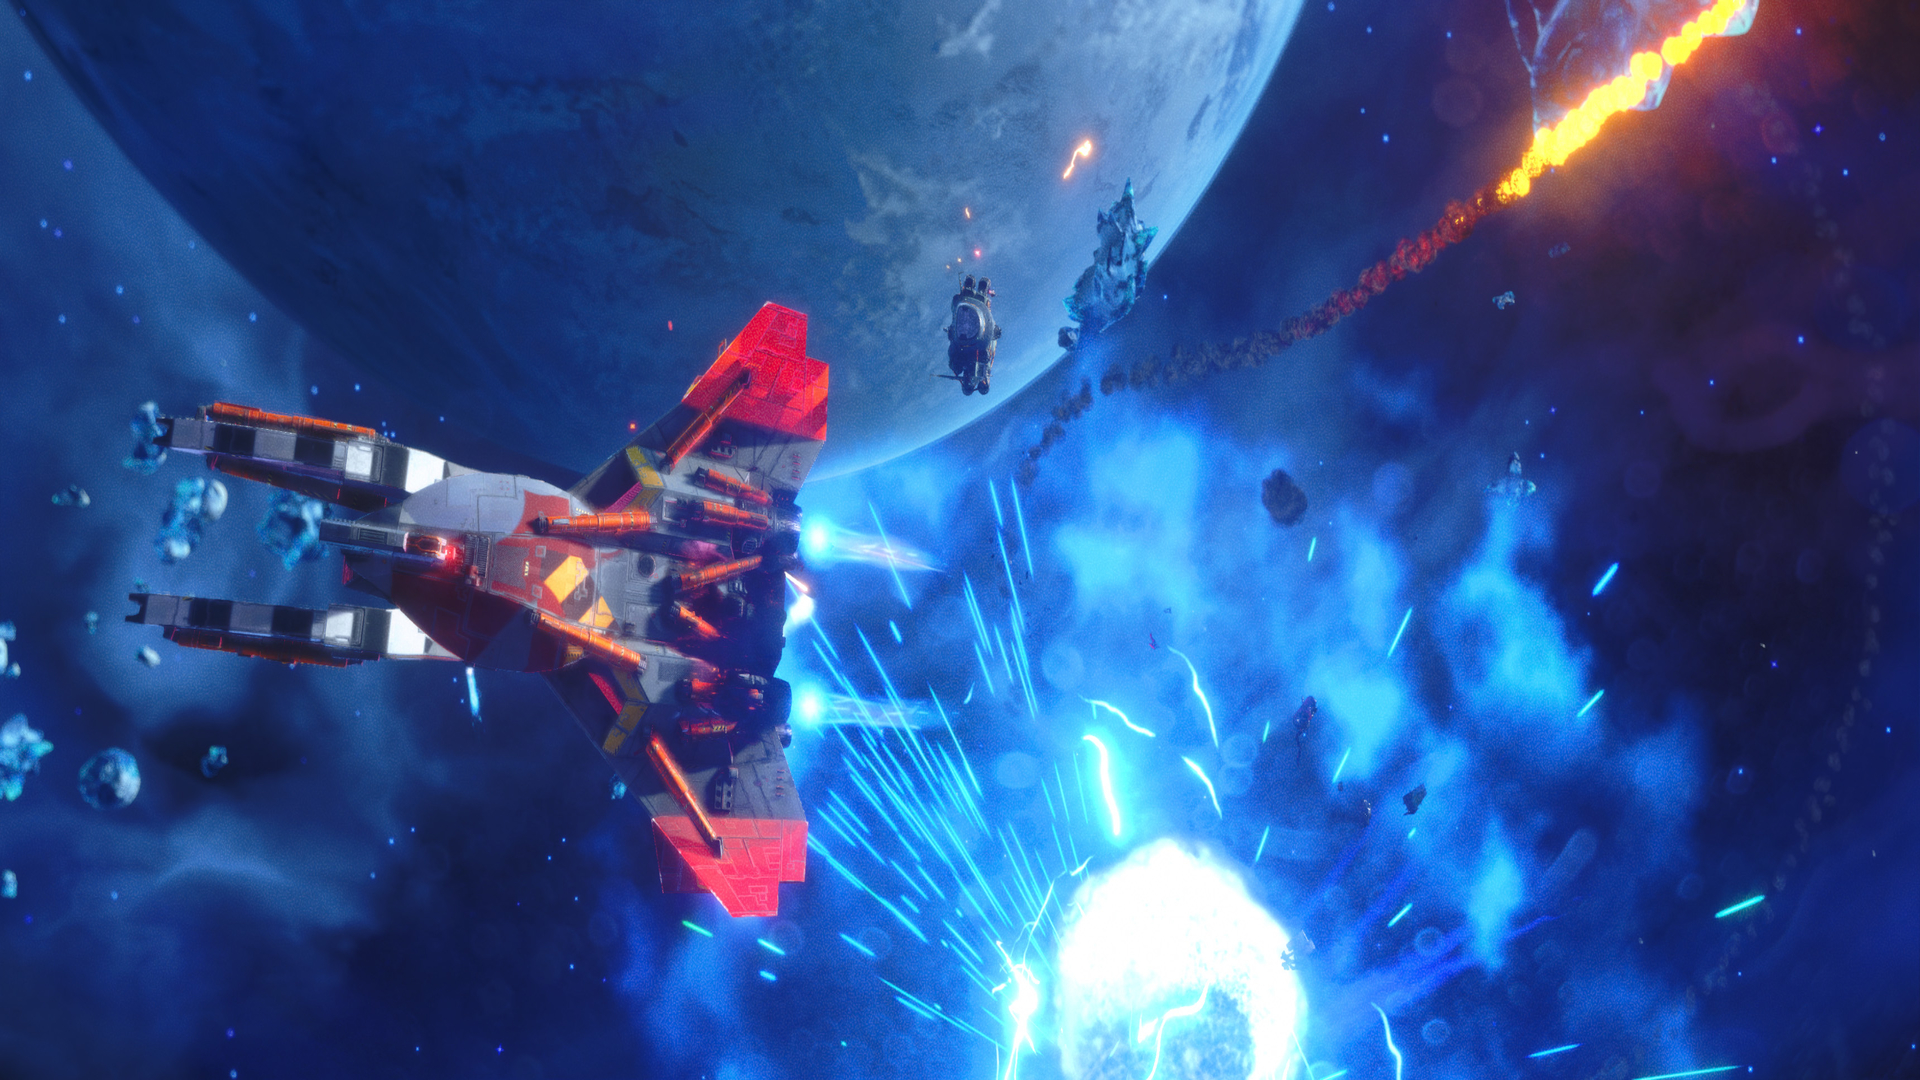 Rebel Galaxy: Outlaw shows off space pirates, seedy bars